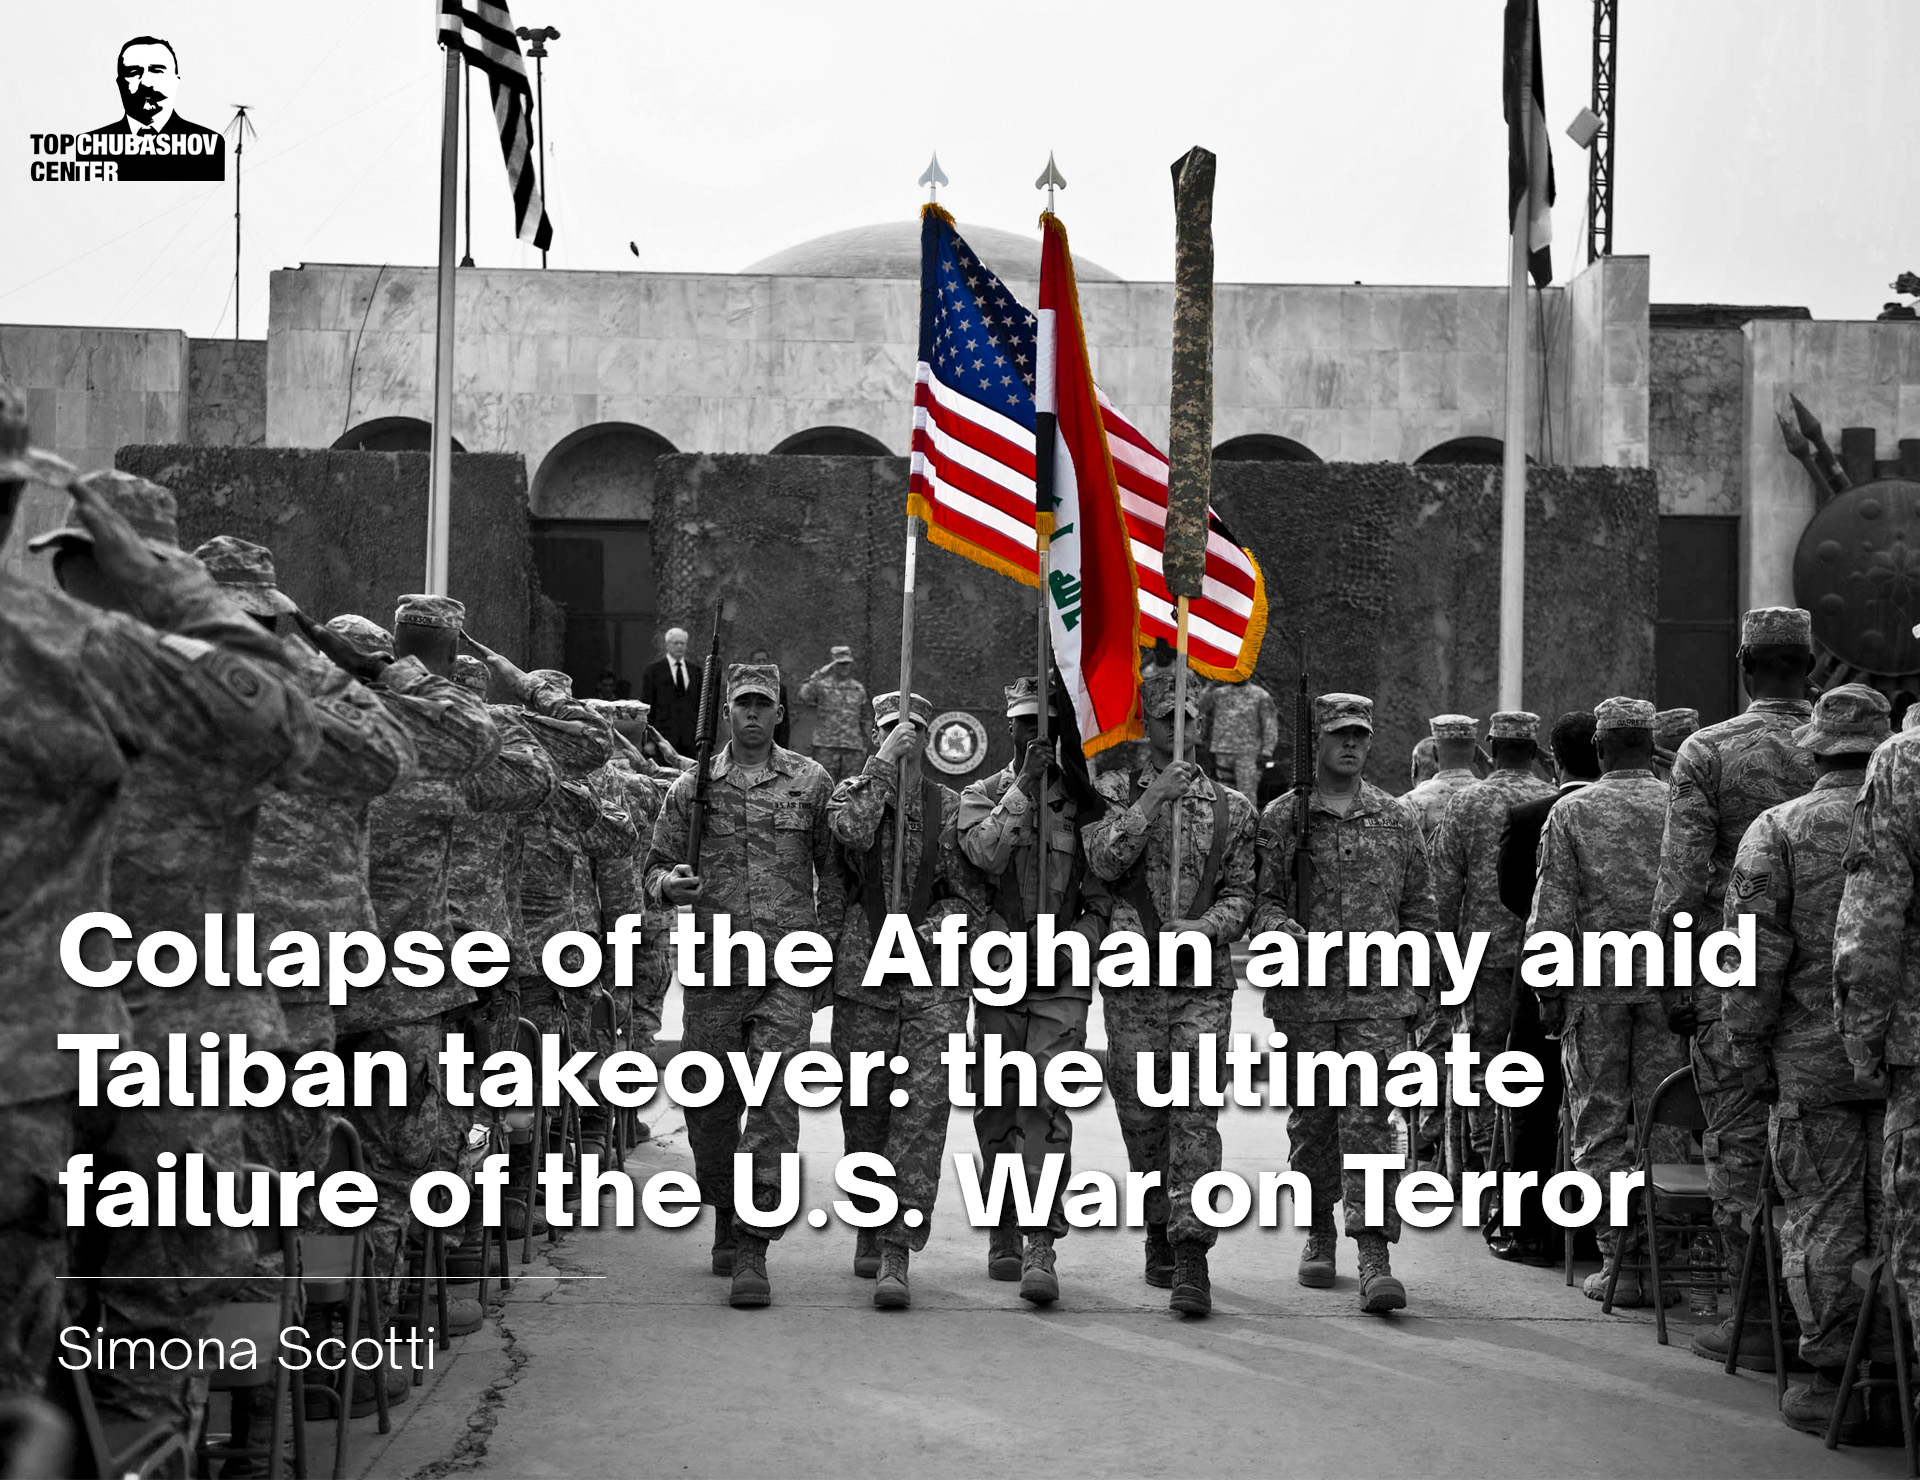 Collapse of the Afghan army amid Taliban takeover: The ultimate failure of the U.S. War on Terror